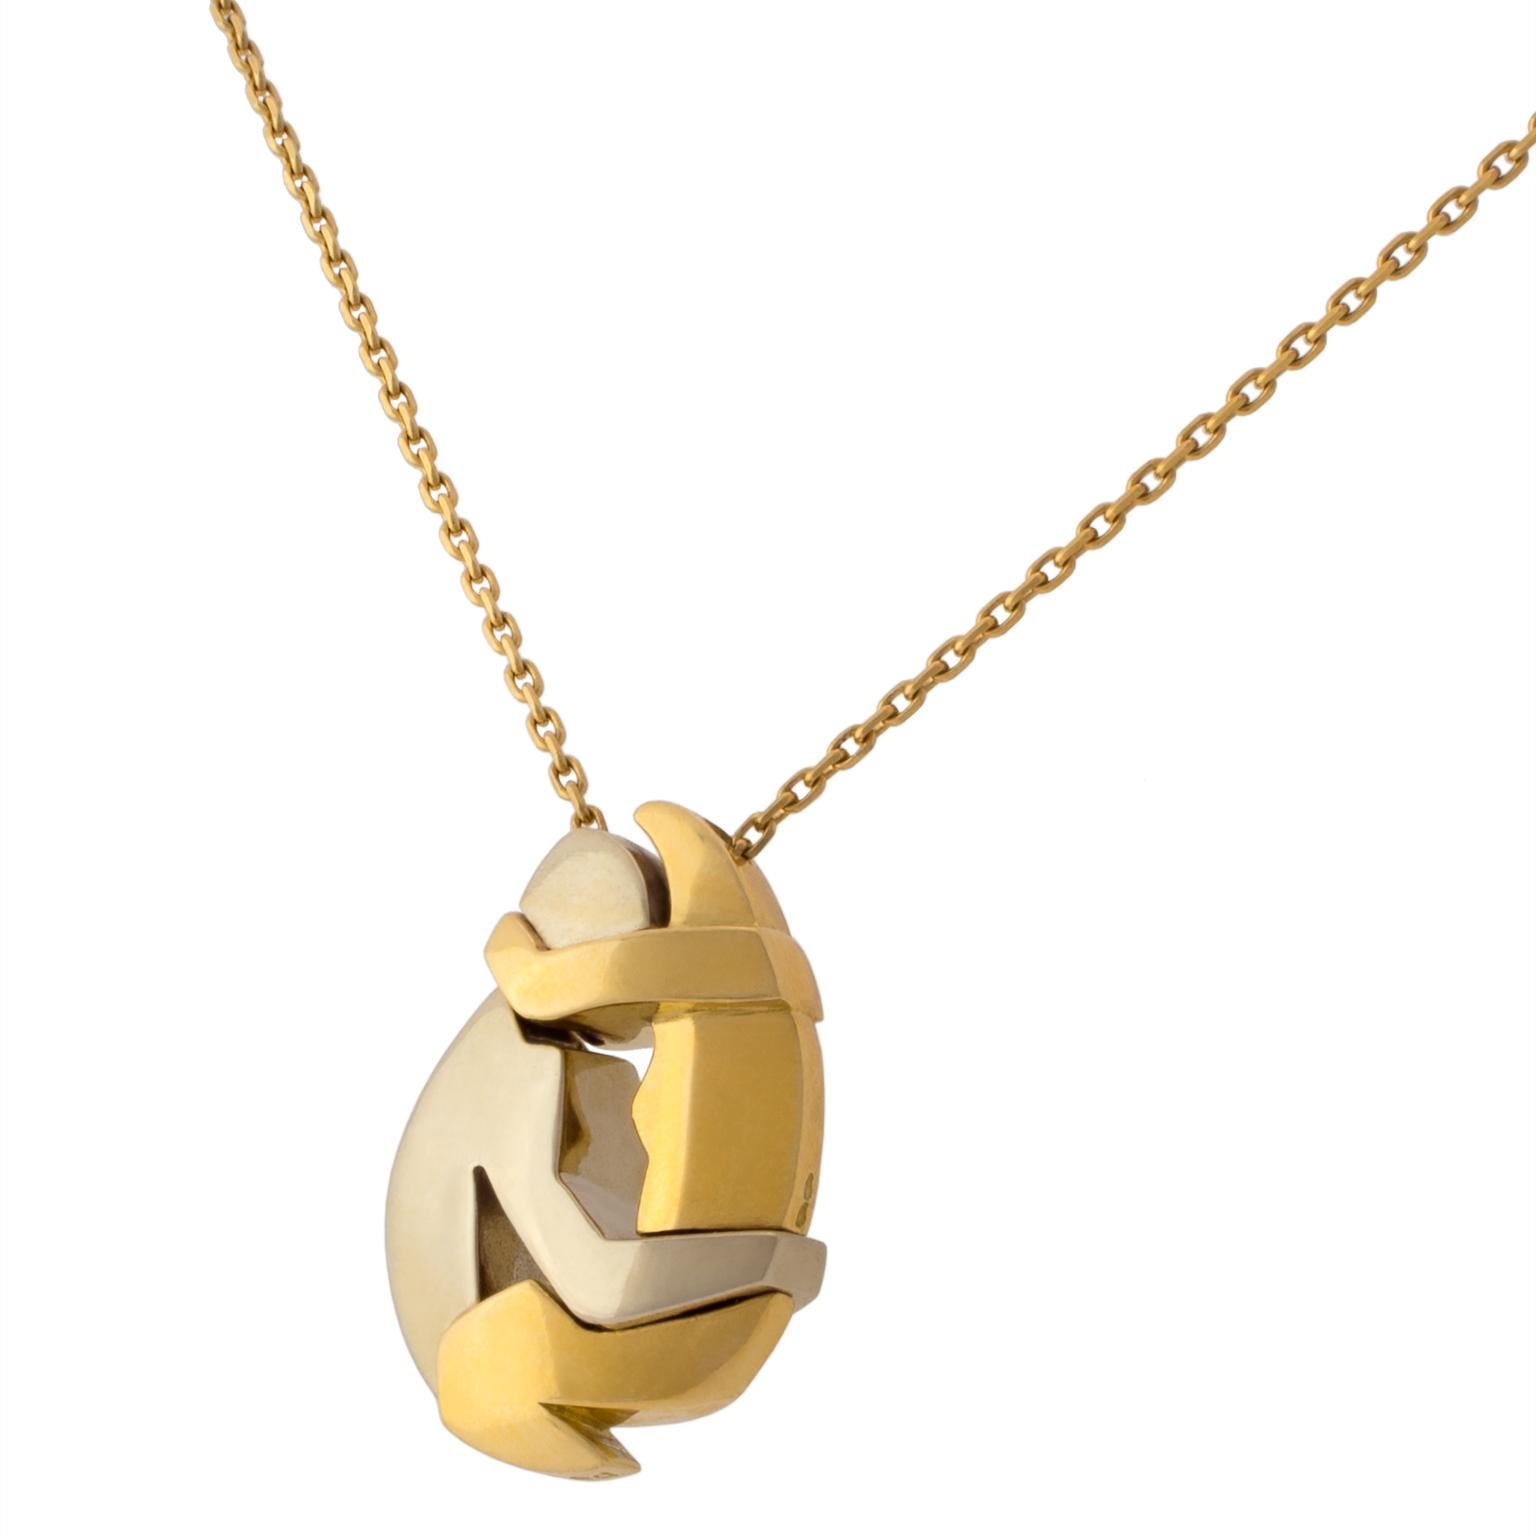 Pendant necklace by Fred, with a puzzle-like pendant formed of three separate pieces which fit together into the shape of two white and yellow 18K gold figures engaging in an embrace. Signed by Miroslav Brozek
Chain length: 36 cm (14.17 in)
Pendant